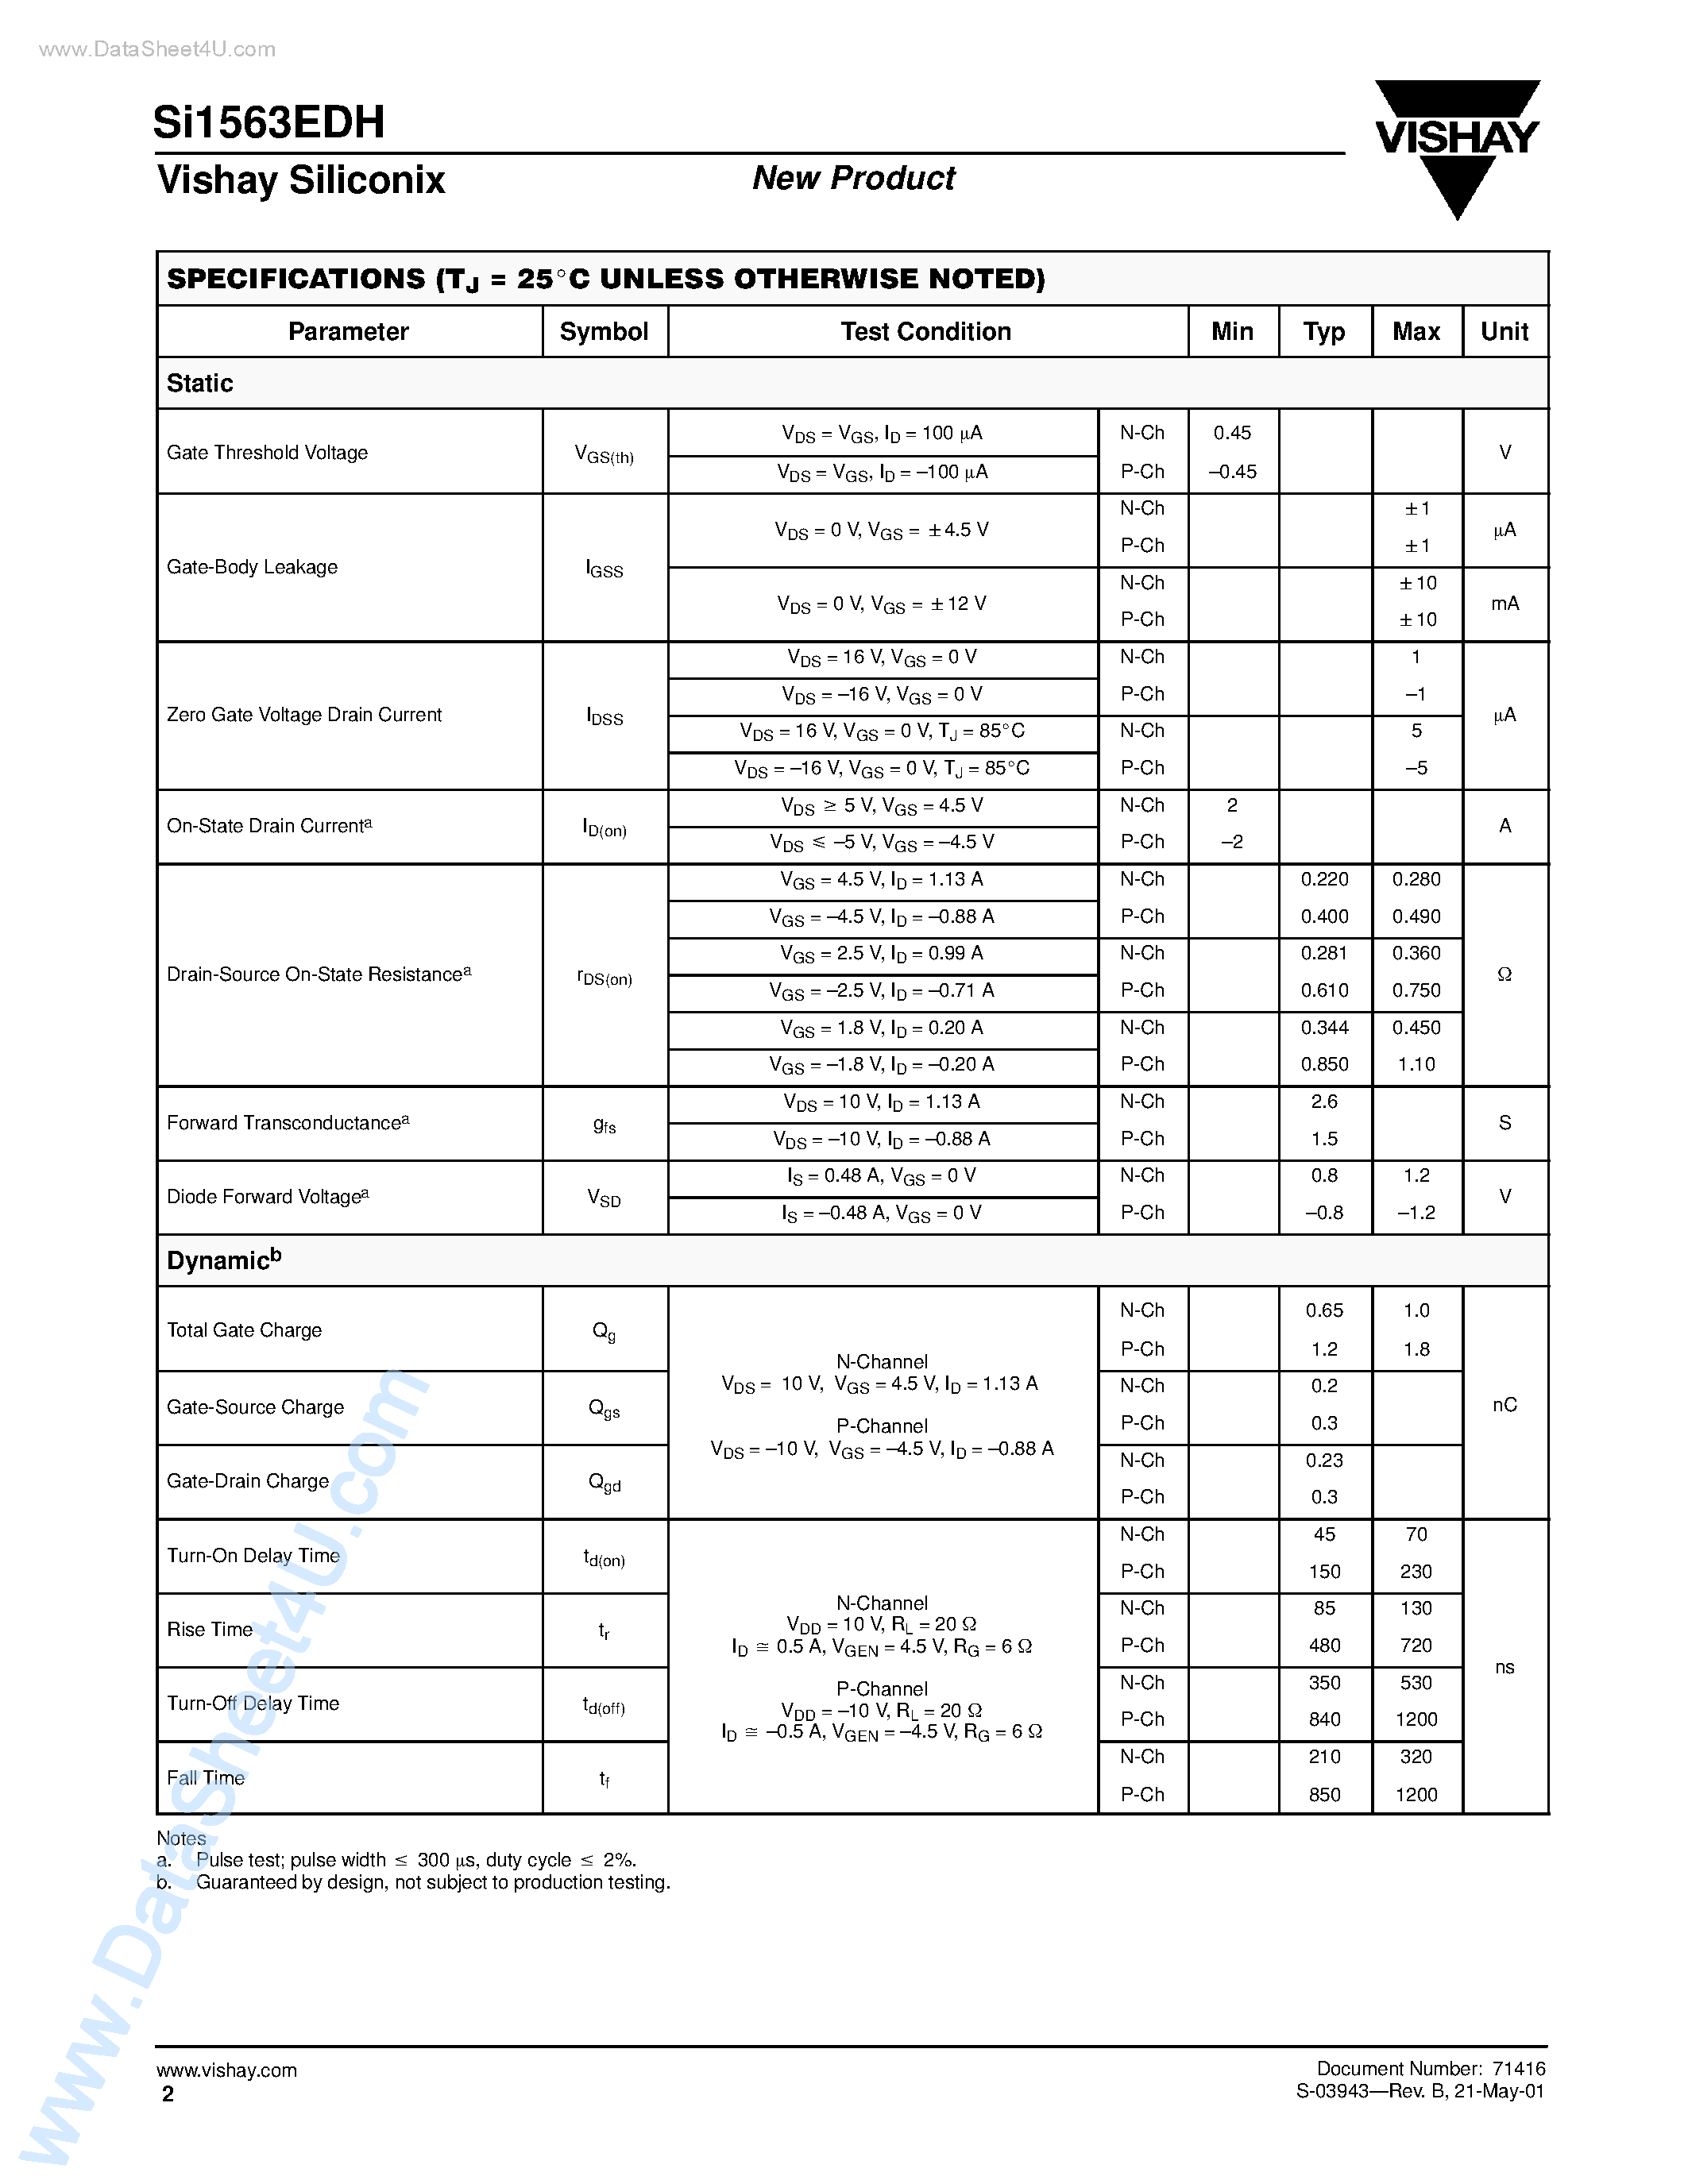 Datasheet SI1563EDH - Complementary 20-V (D-S) Low-Threshold MOSFET page 2